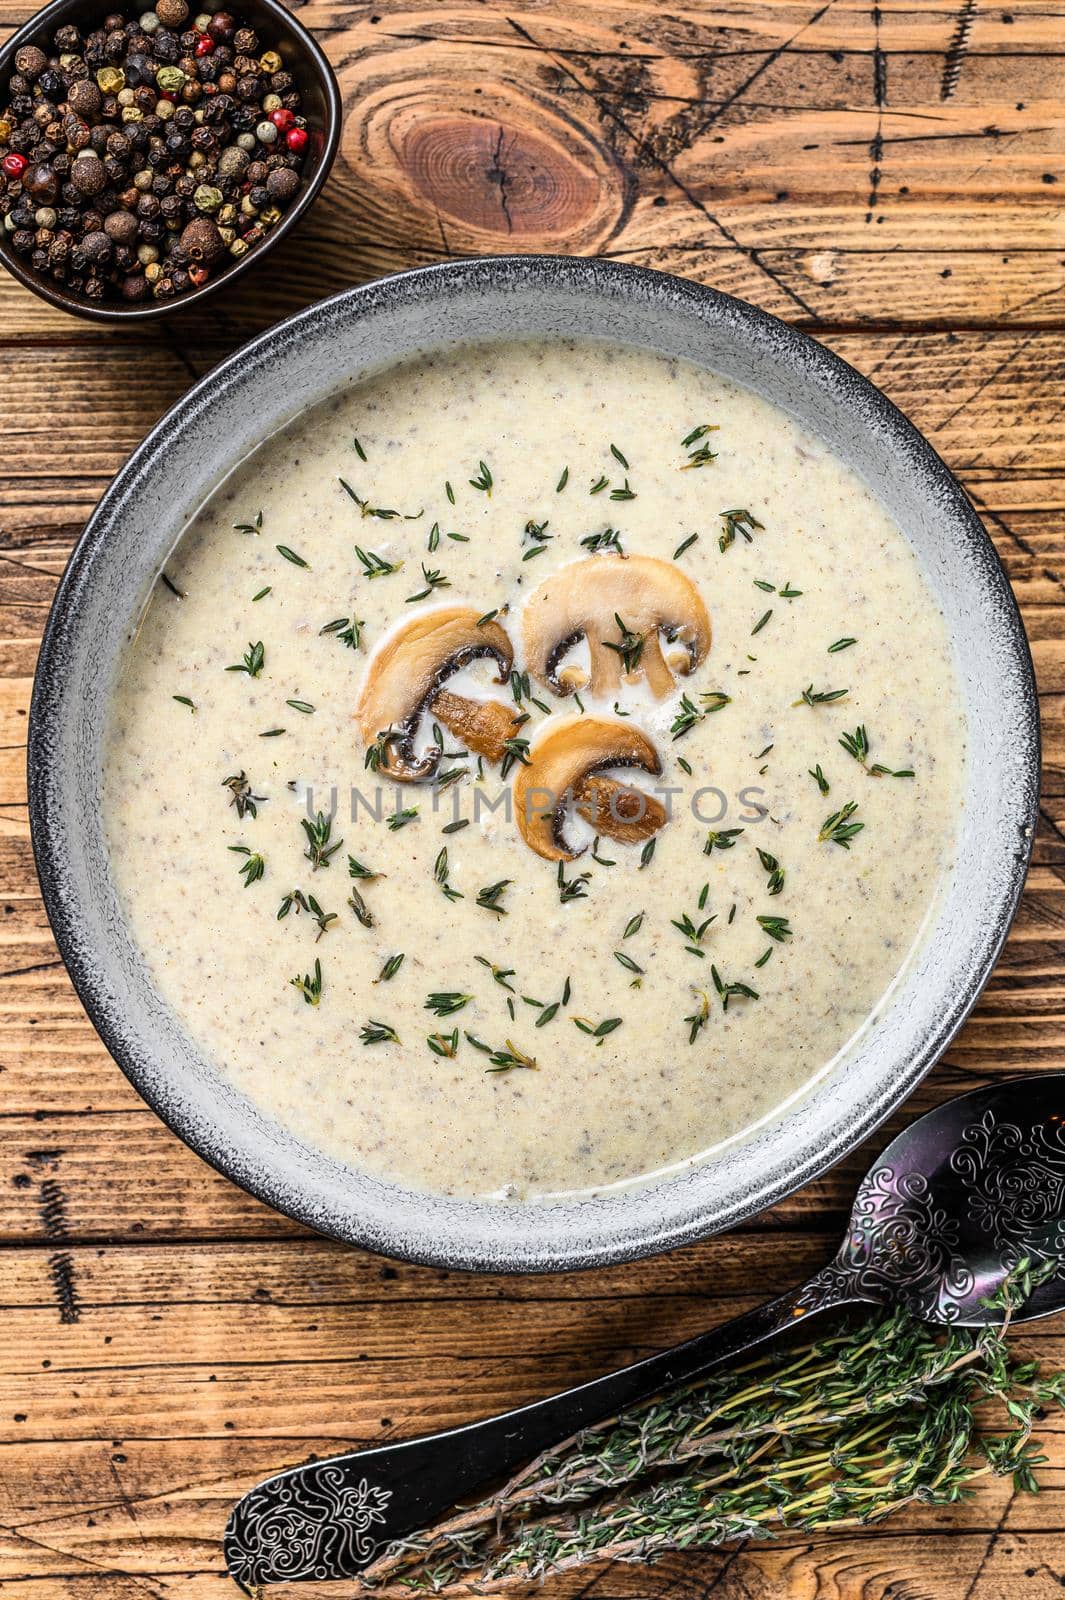 Mushroom cream soup in a plate. Wooden background. Top view by Composter